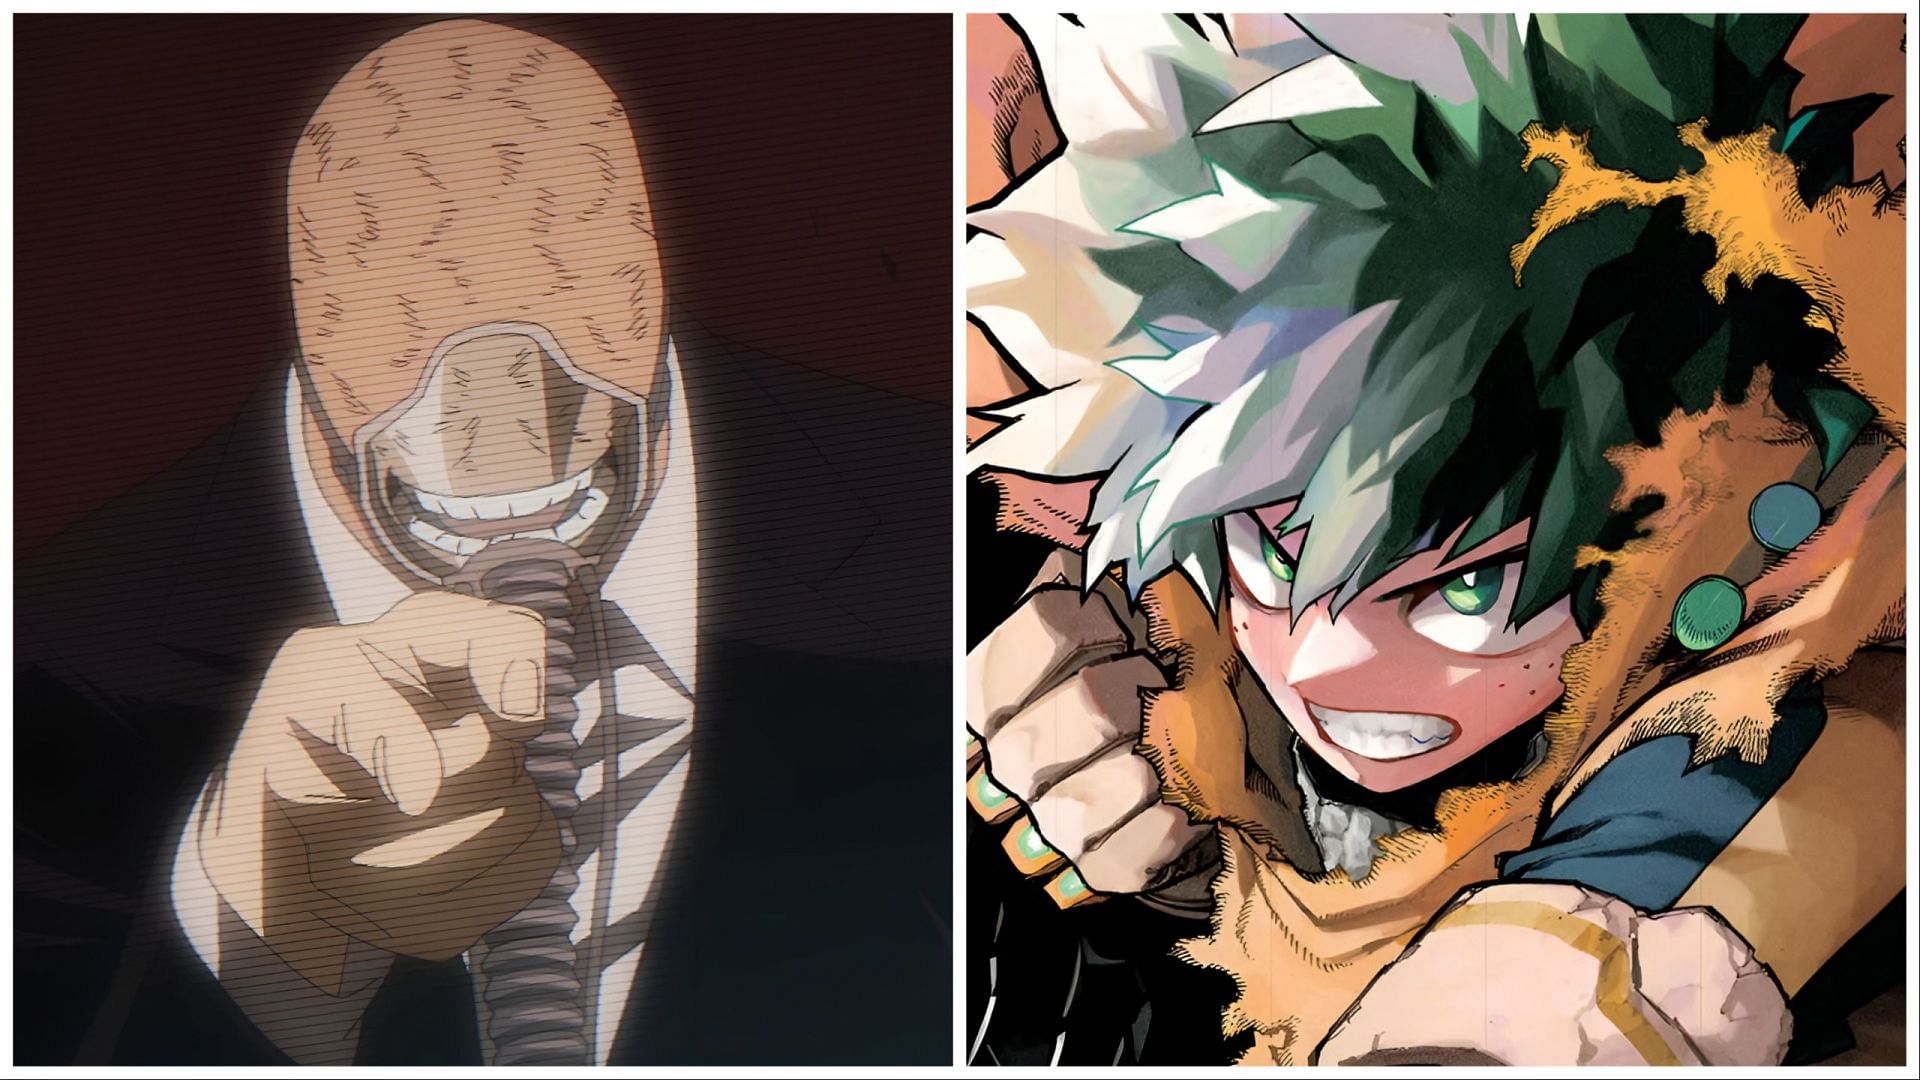 My Hero Academia chapter 422 spoilers: Deku vs All For One reaches a climax as Ochako